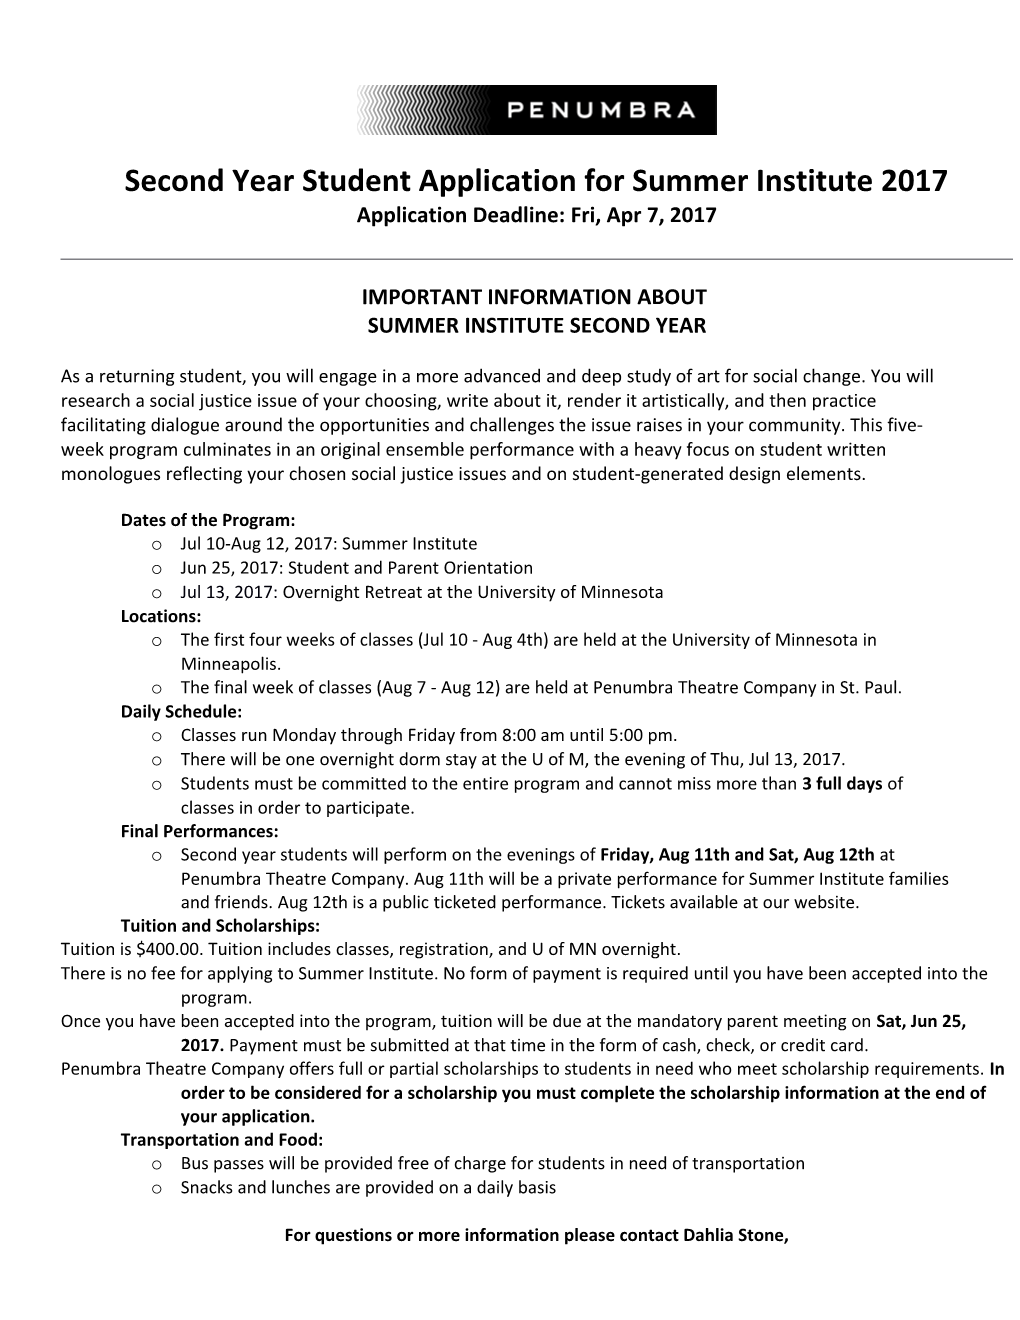 Second Year Student Application for Summer Institute 2017